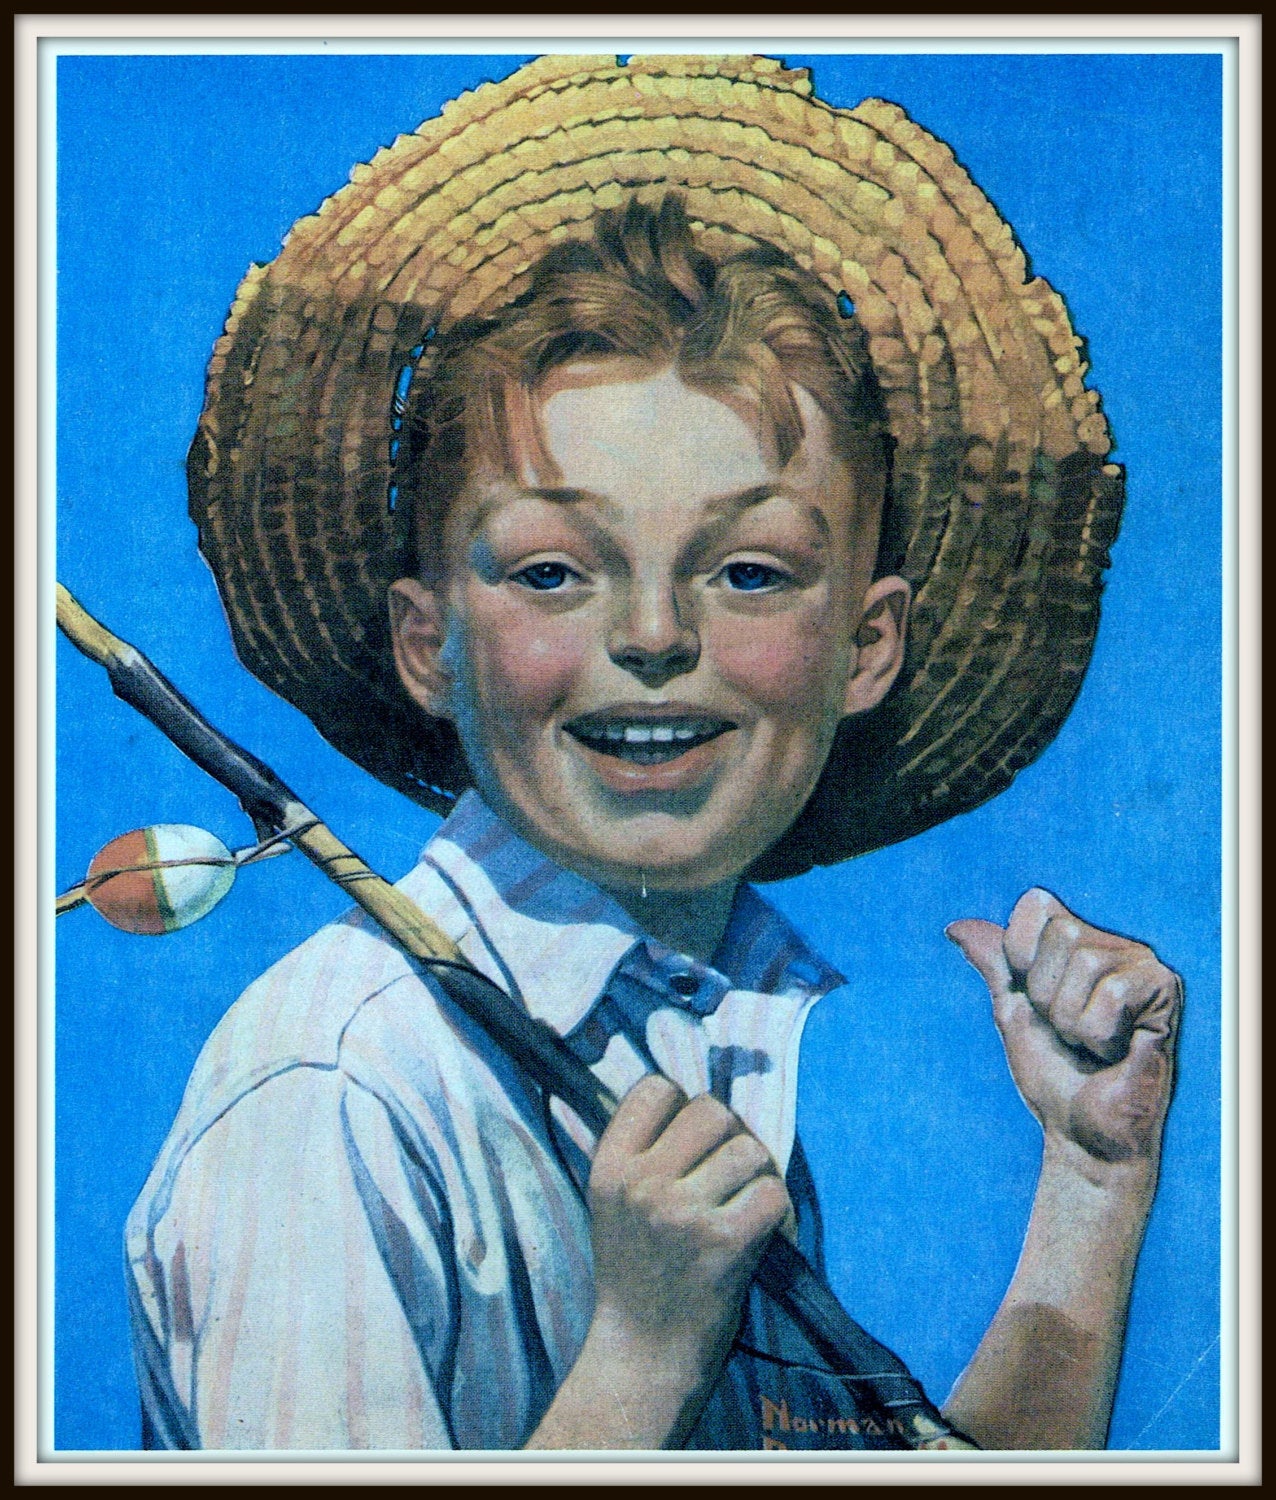 Vintage, Art Print, Norman Rockwell, Boy with Fishing Pole 1919